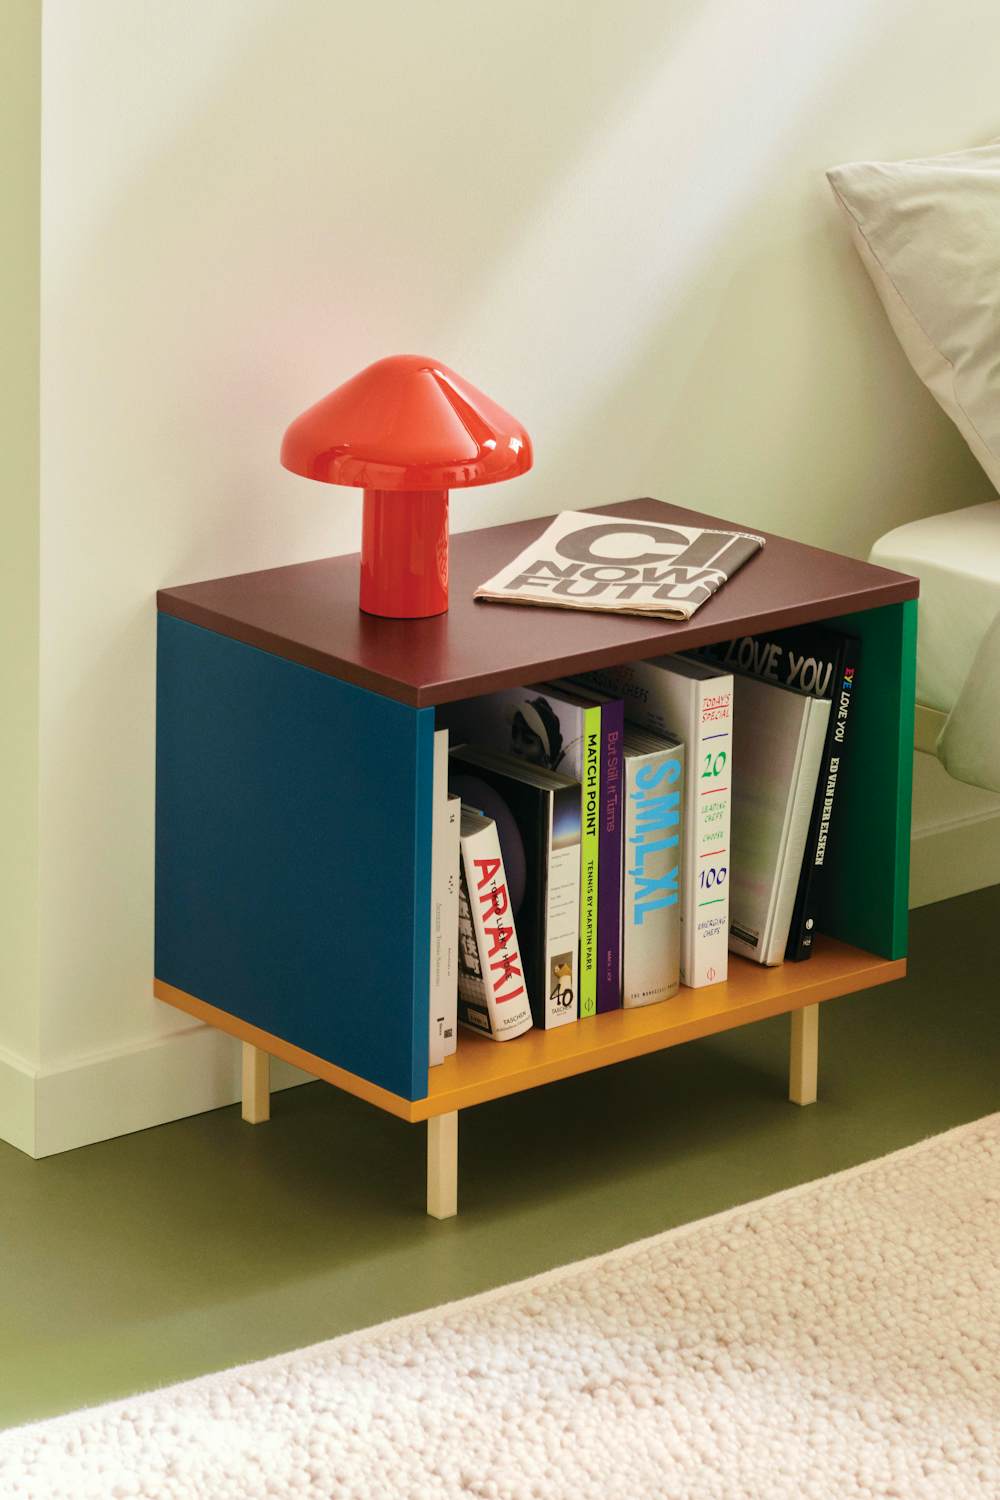 Pao Portable Mushroom Lamp on top of a Color Cabinet in a bedroom setting